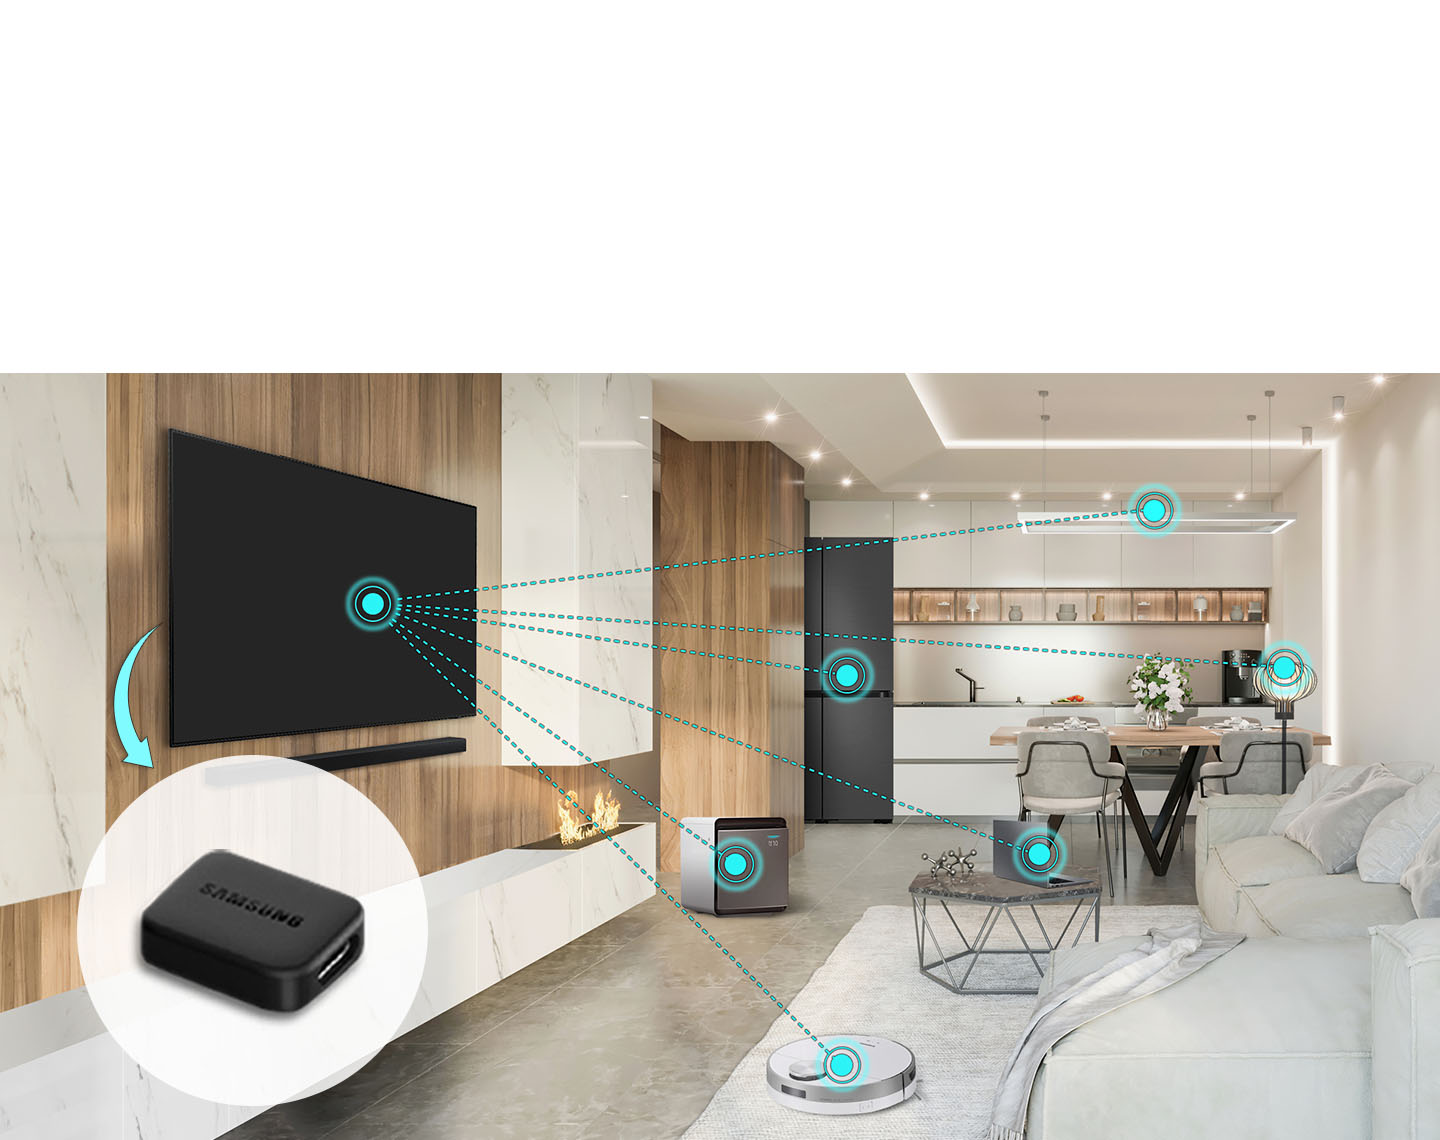 Help. Need outside outlet to extend zwave range - Devices & Integrations -  SmartThings Community